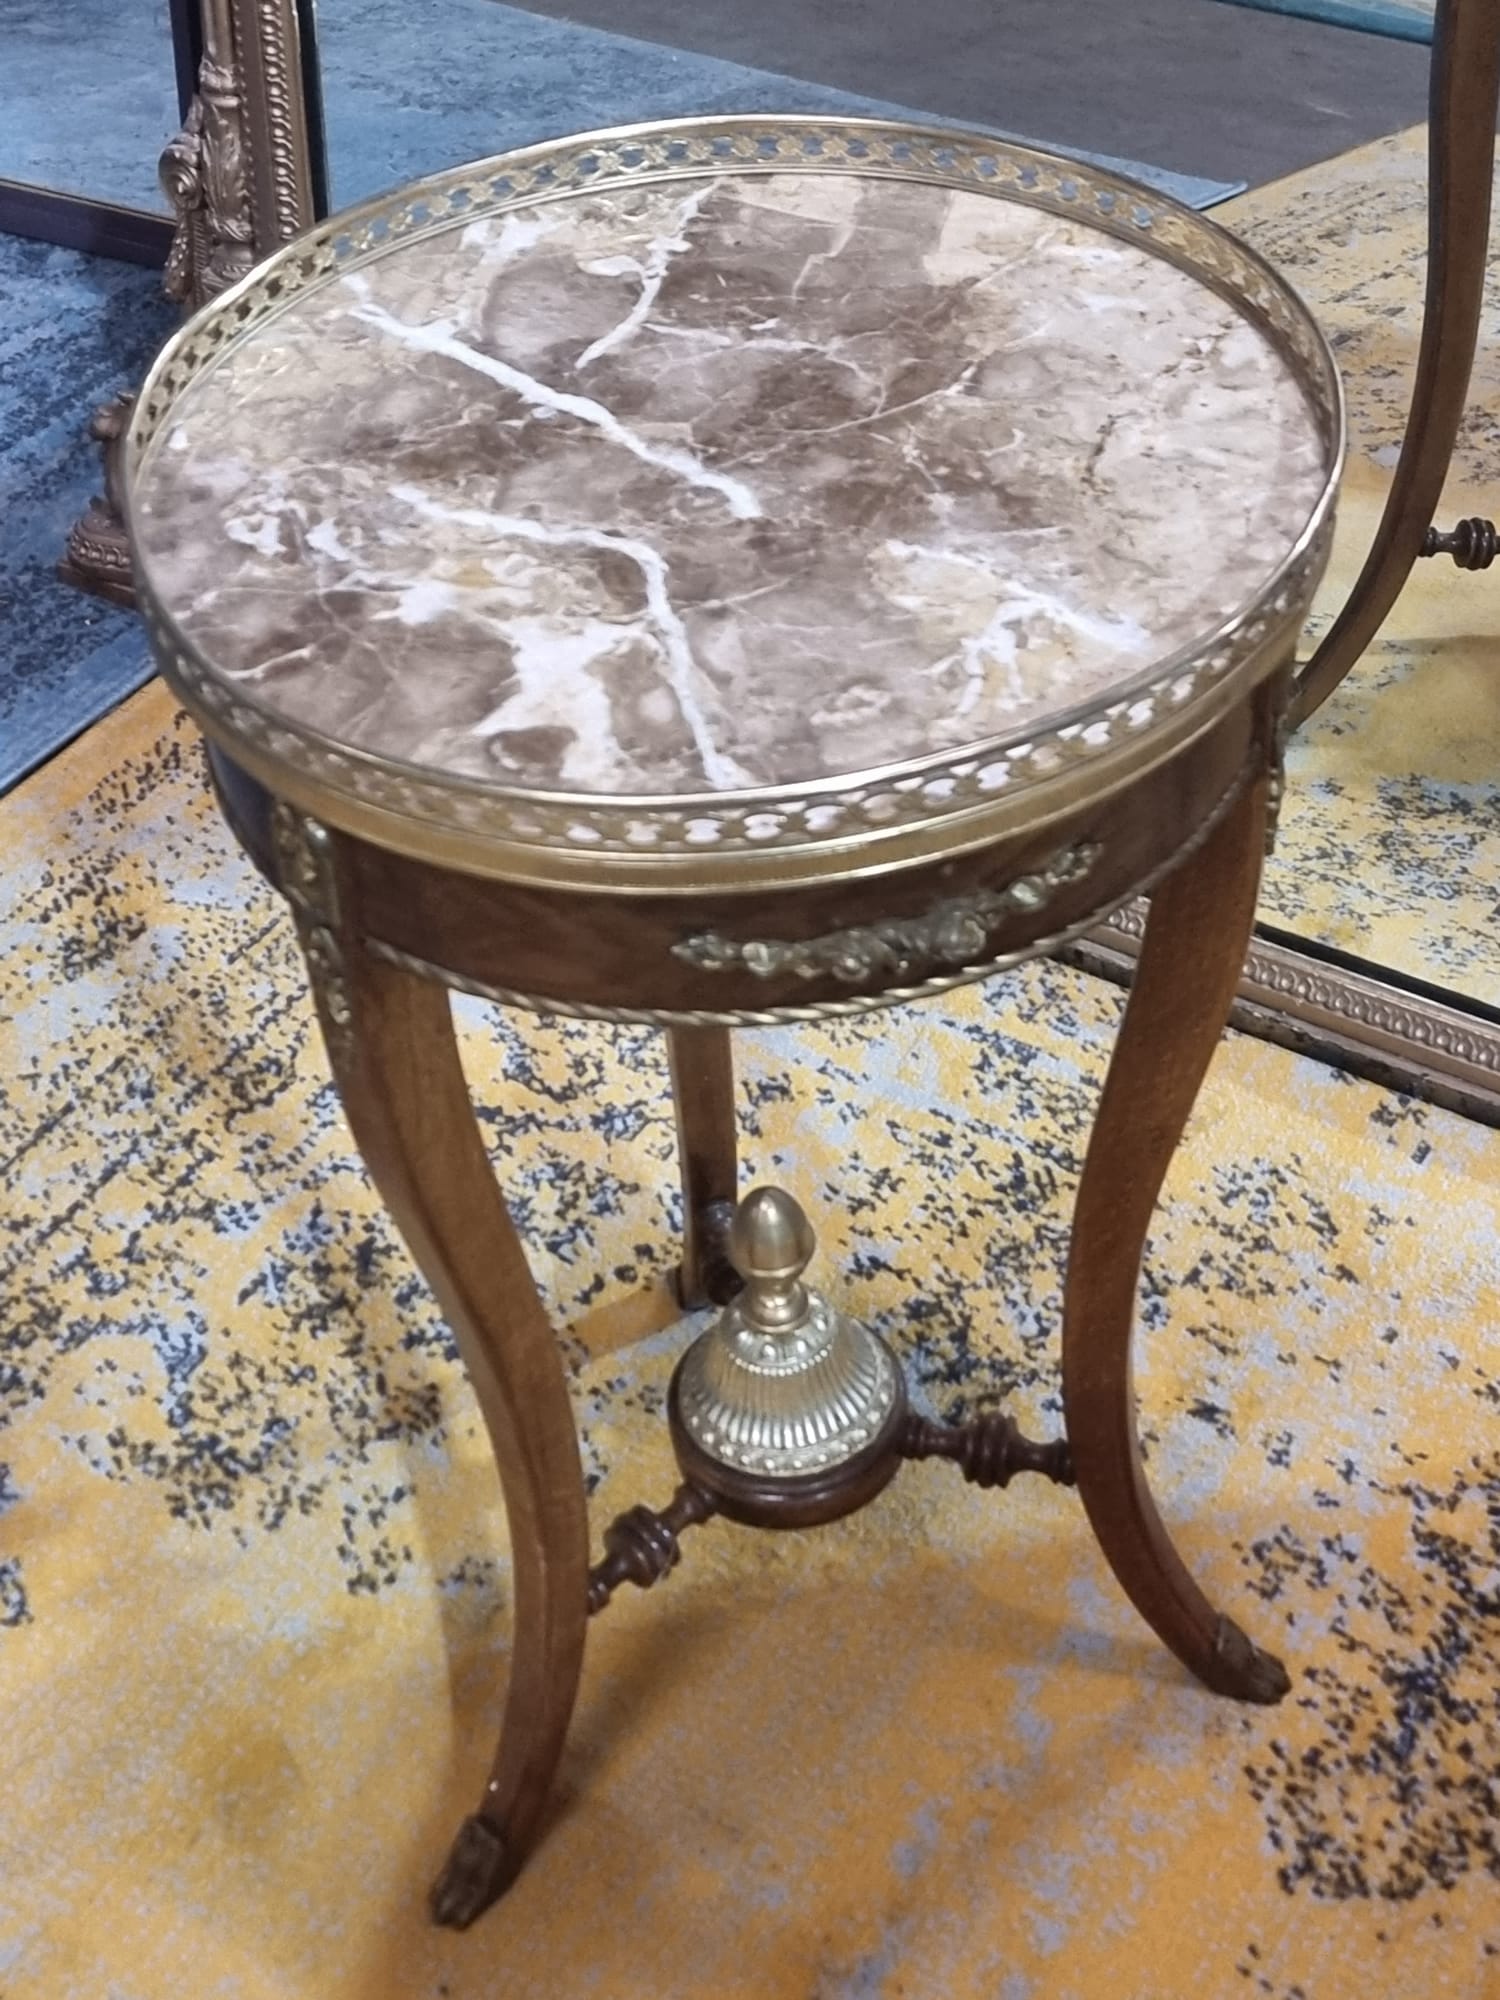 French Empire Gueridon Table Mahogany And Gilt Metal Inlay, Circular Galleried Marble top above a - Image 3 of 10